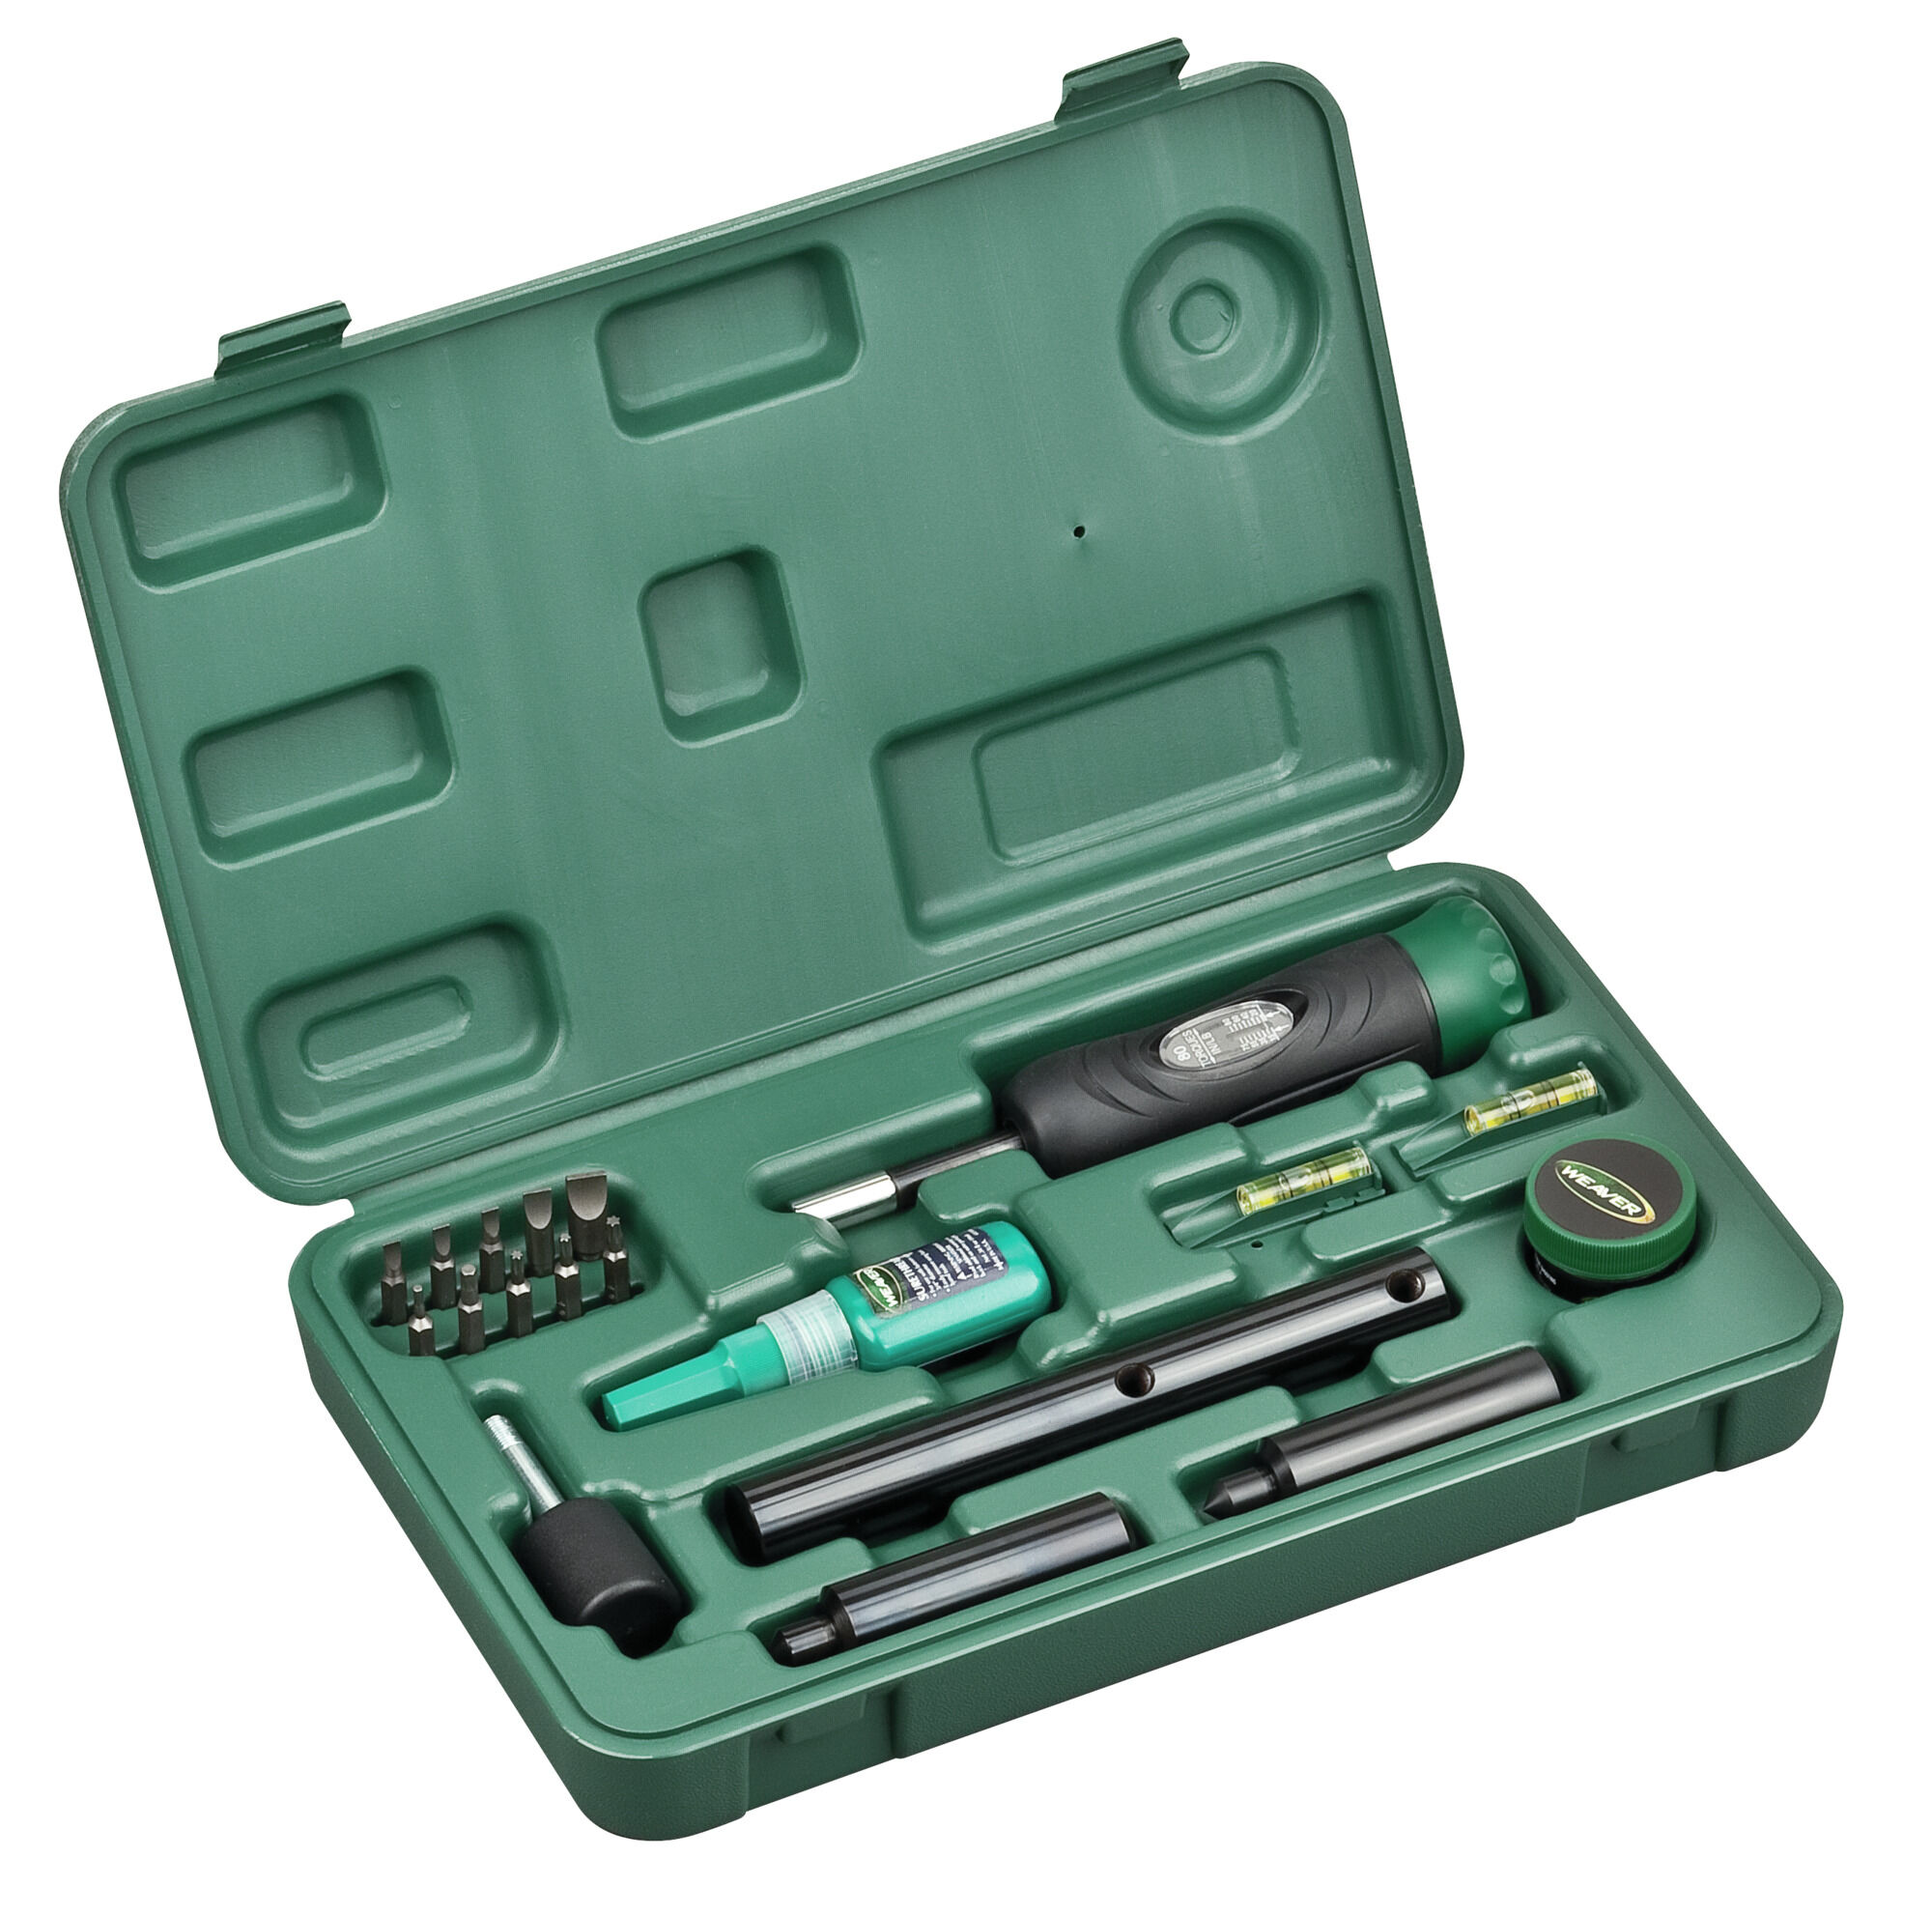 Weaver 849721 Black/Green Deluxe Scope Mounting Tool Kit 1" Lapping Tools 